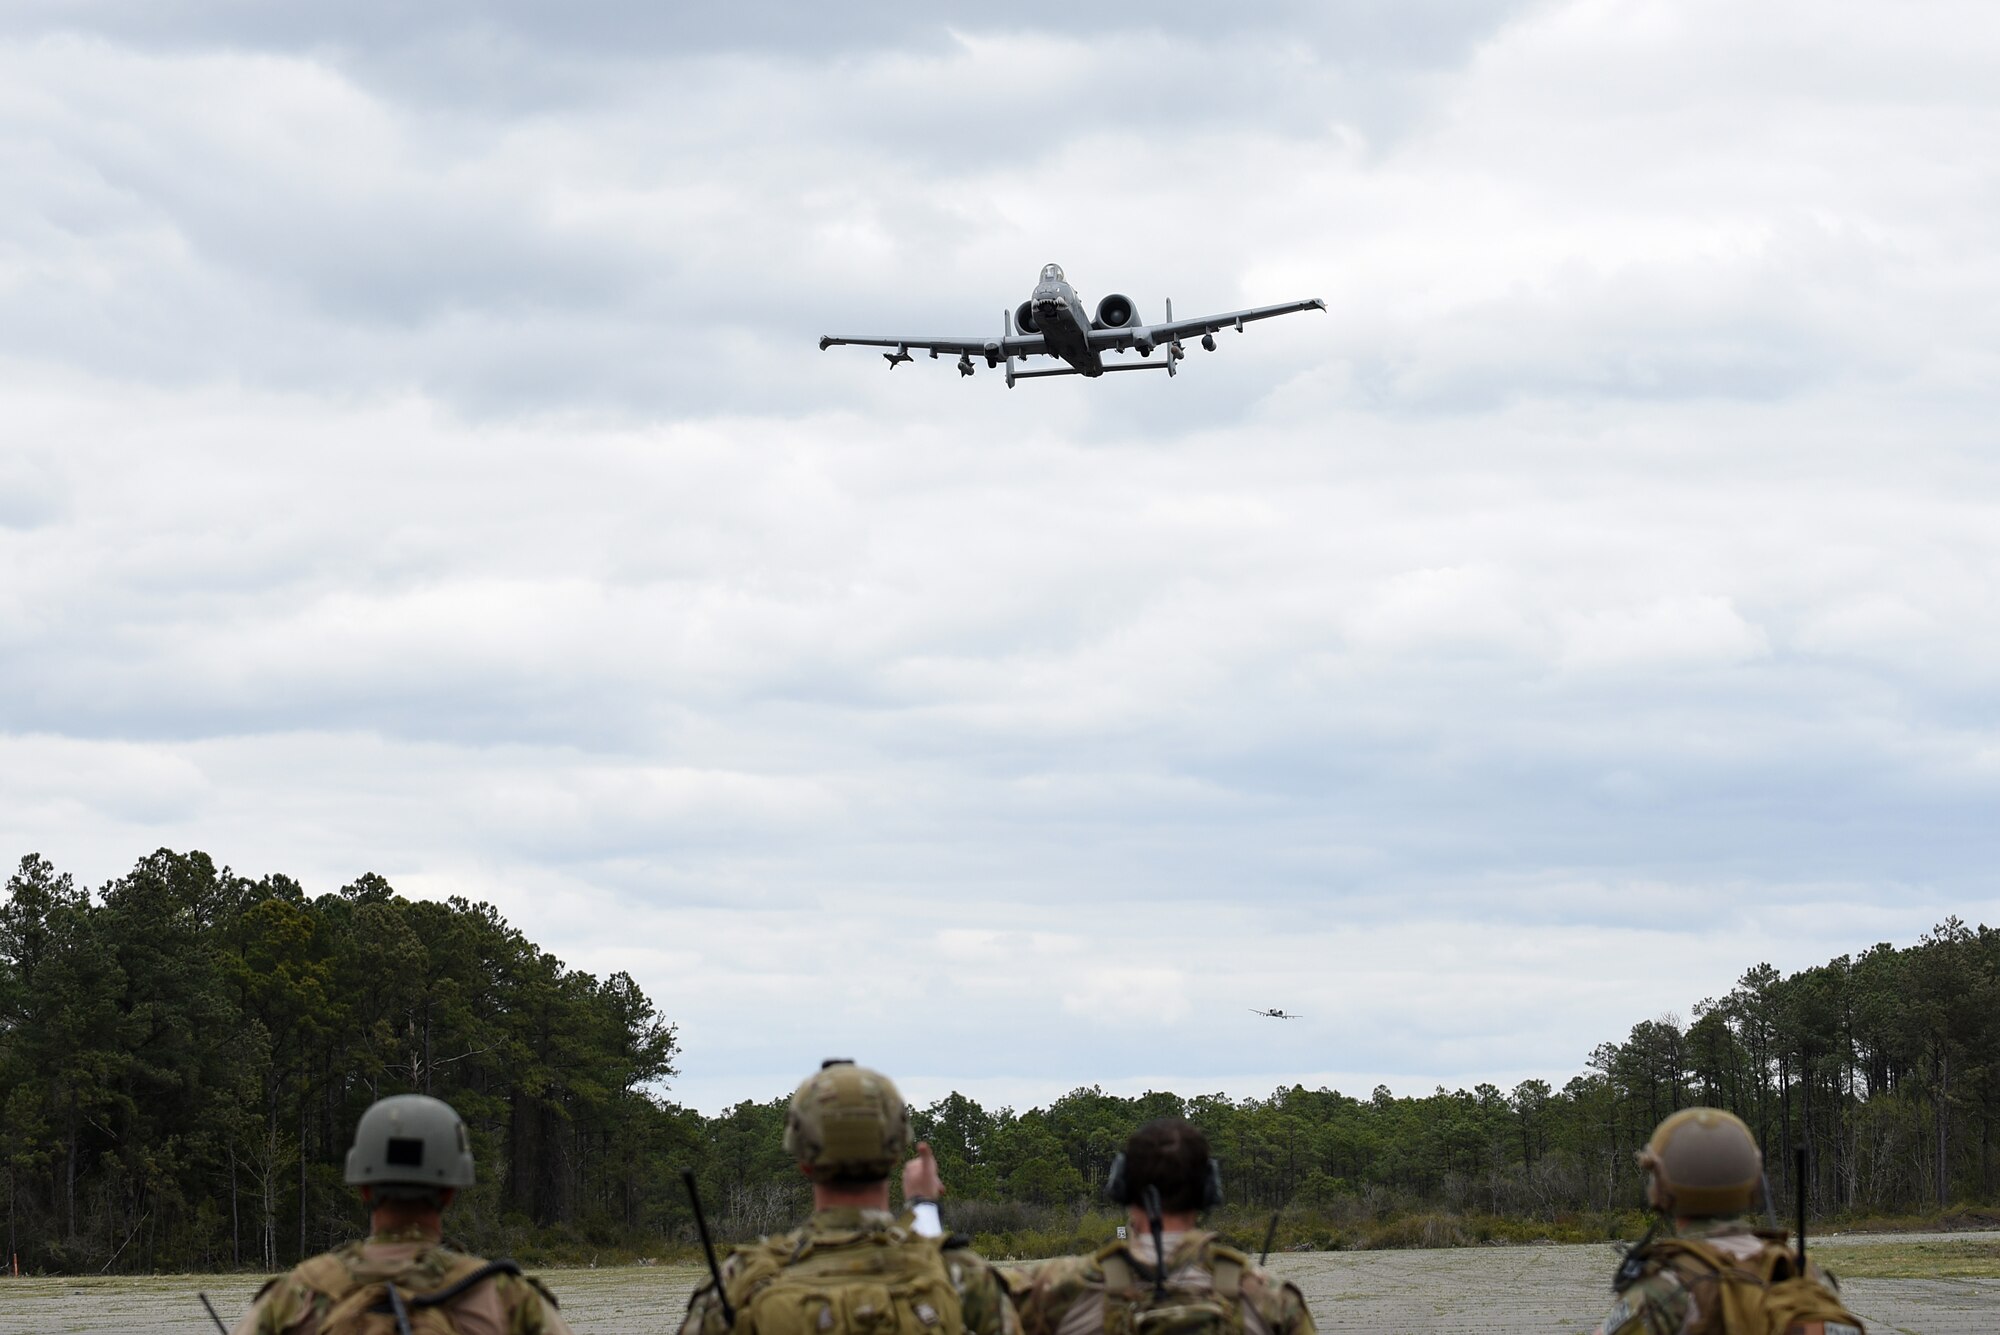 An A-10C Thunderbolt II flies over a group of tactical air control party specialists from the 14th Air Support Operations Squadron during exercise Razor Talon, April 7, 2017, at Atlantic Field Marine Corps Outlying Field, North Carolina. More than 10 aircraft from multiple bases participated in Razor Talon. (U.S. Air Force photo by Airman 1st Class Kenneth Boyton)